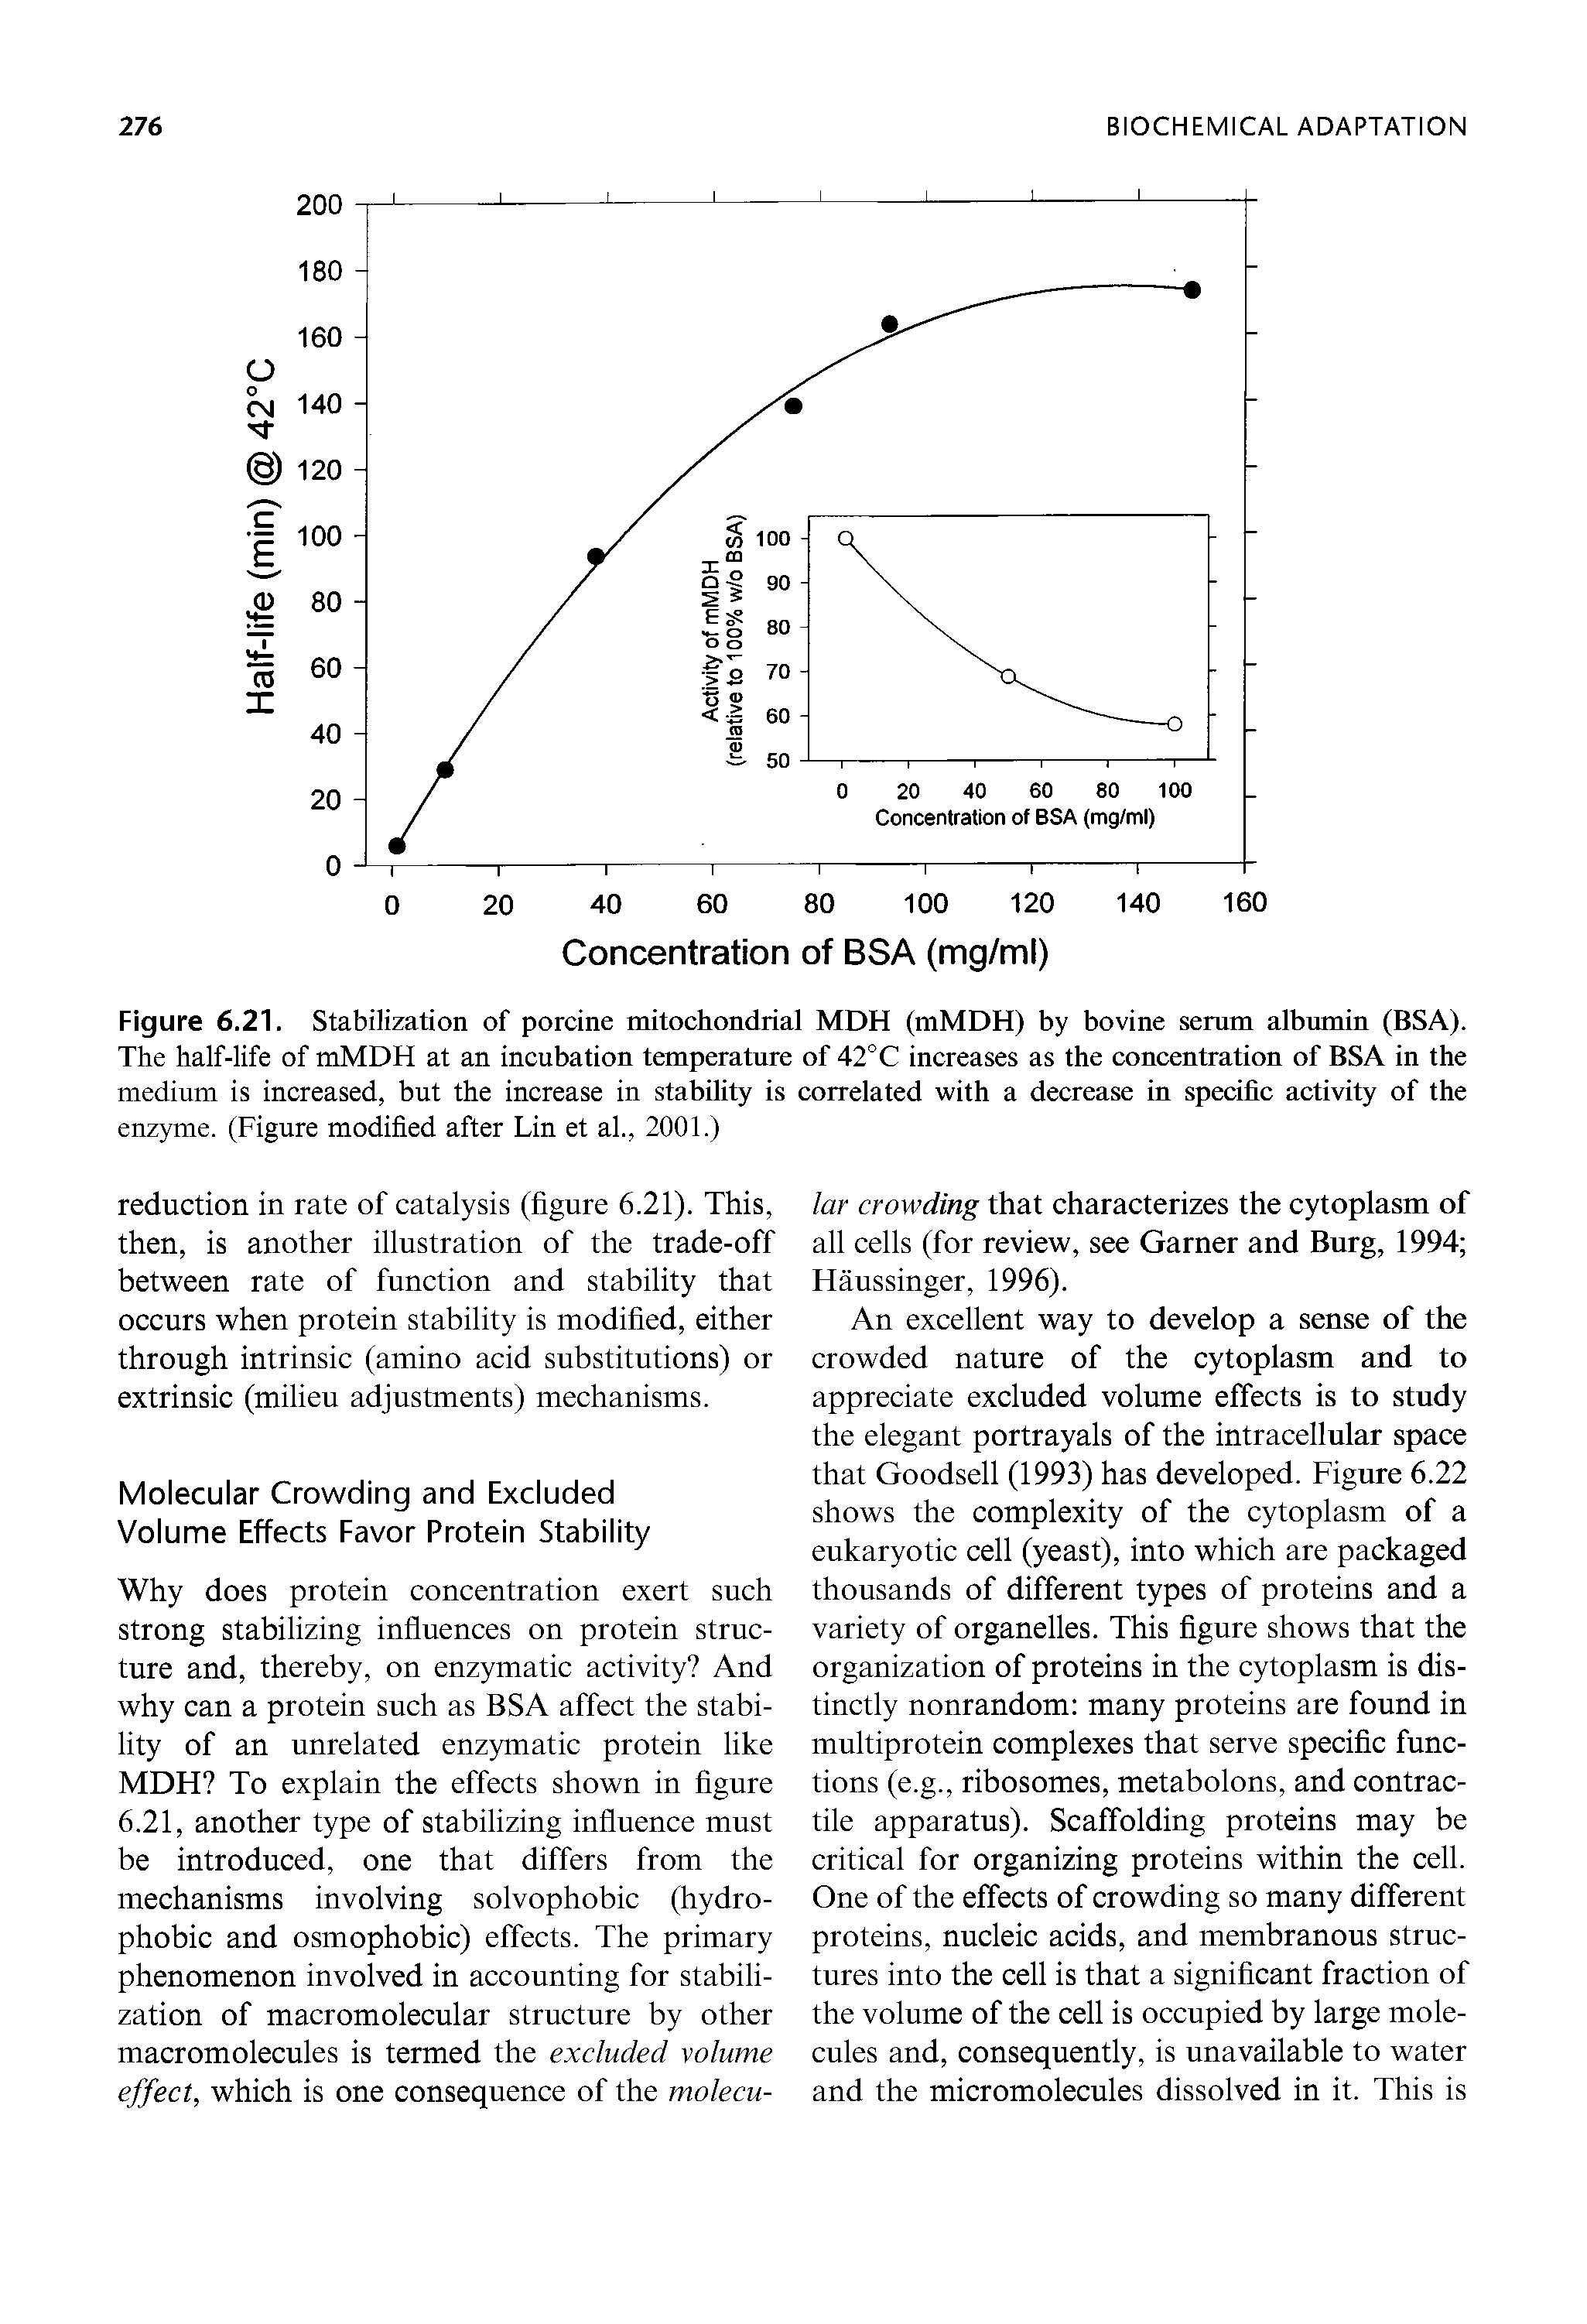 Figure 6.21. Stabilization of porcine mitochondrial MDH (mMDH) by bovine serum albumin (BSA). The half-life of mMDH at an incubation temperature of 42°C increases as the concentration of BSA in the medium is increased, but the increase in stability is correlated with a decrease in specific activity of the enzyme. (Figure modified after Lin et al., 2001.)...